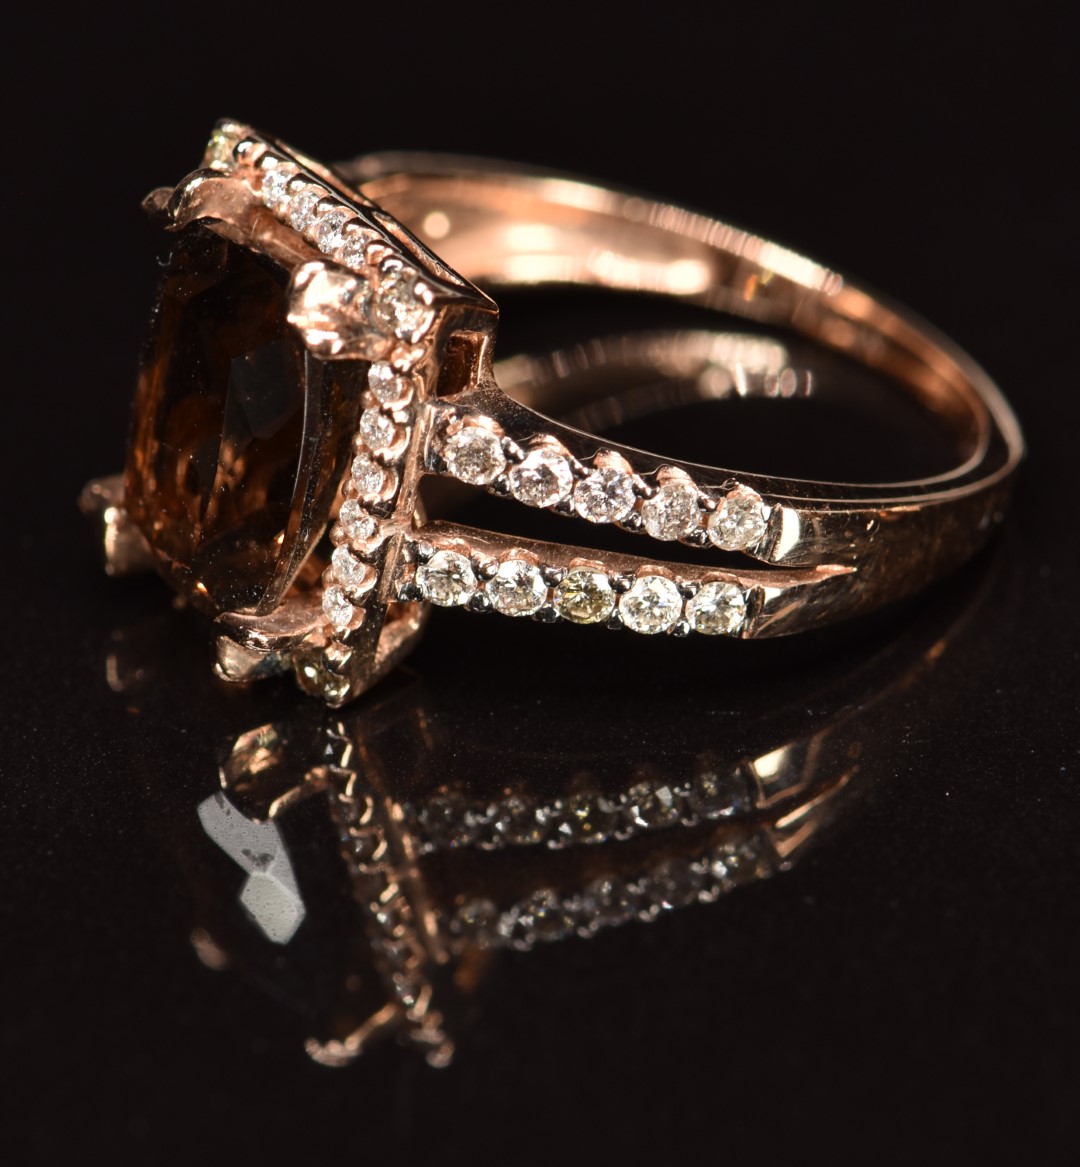 A 14k rose gold ring set with smoky quartz and diamonds, with matching earrings, 7g - Image 2 of 3